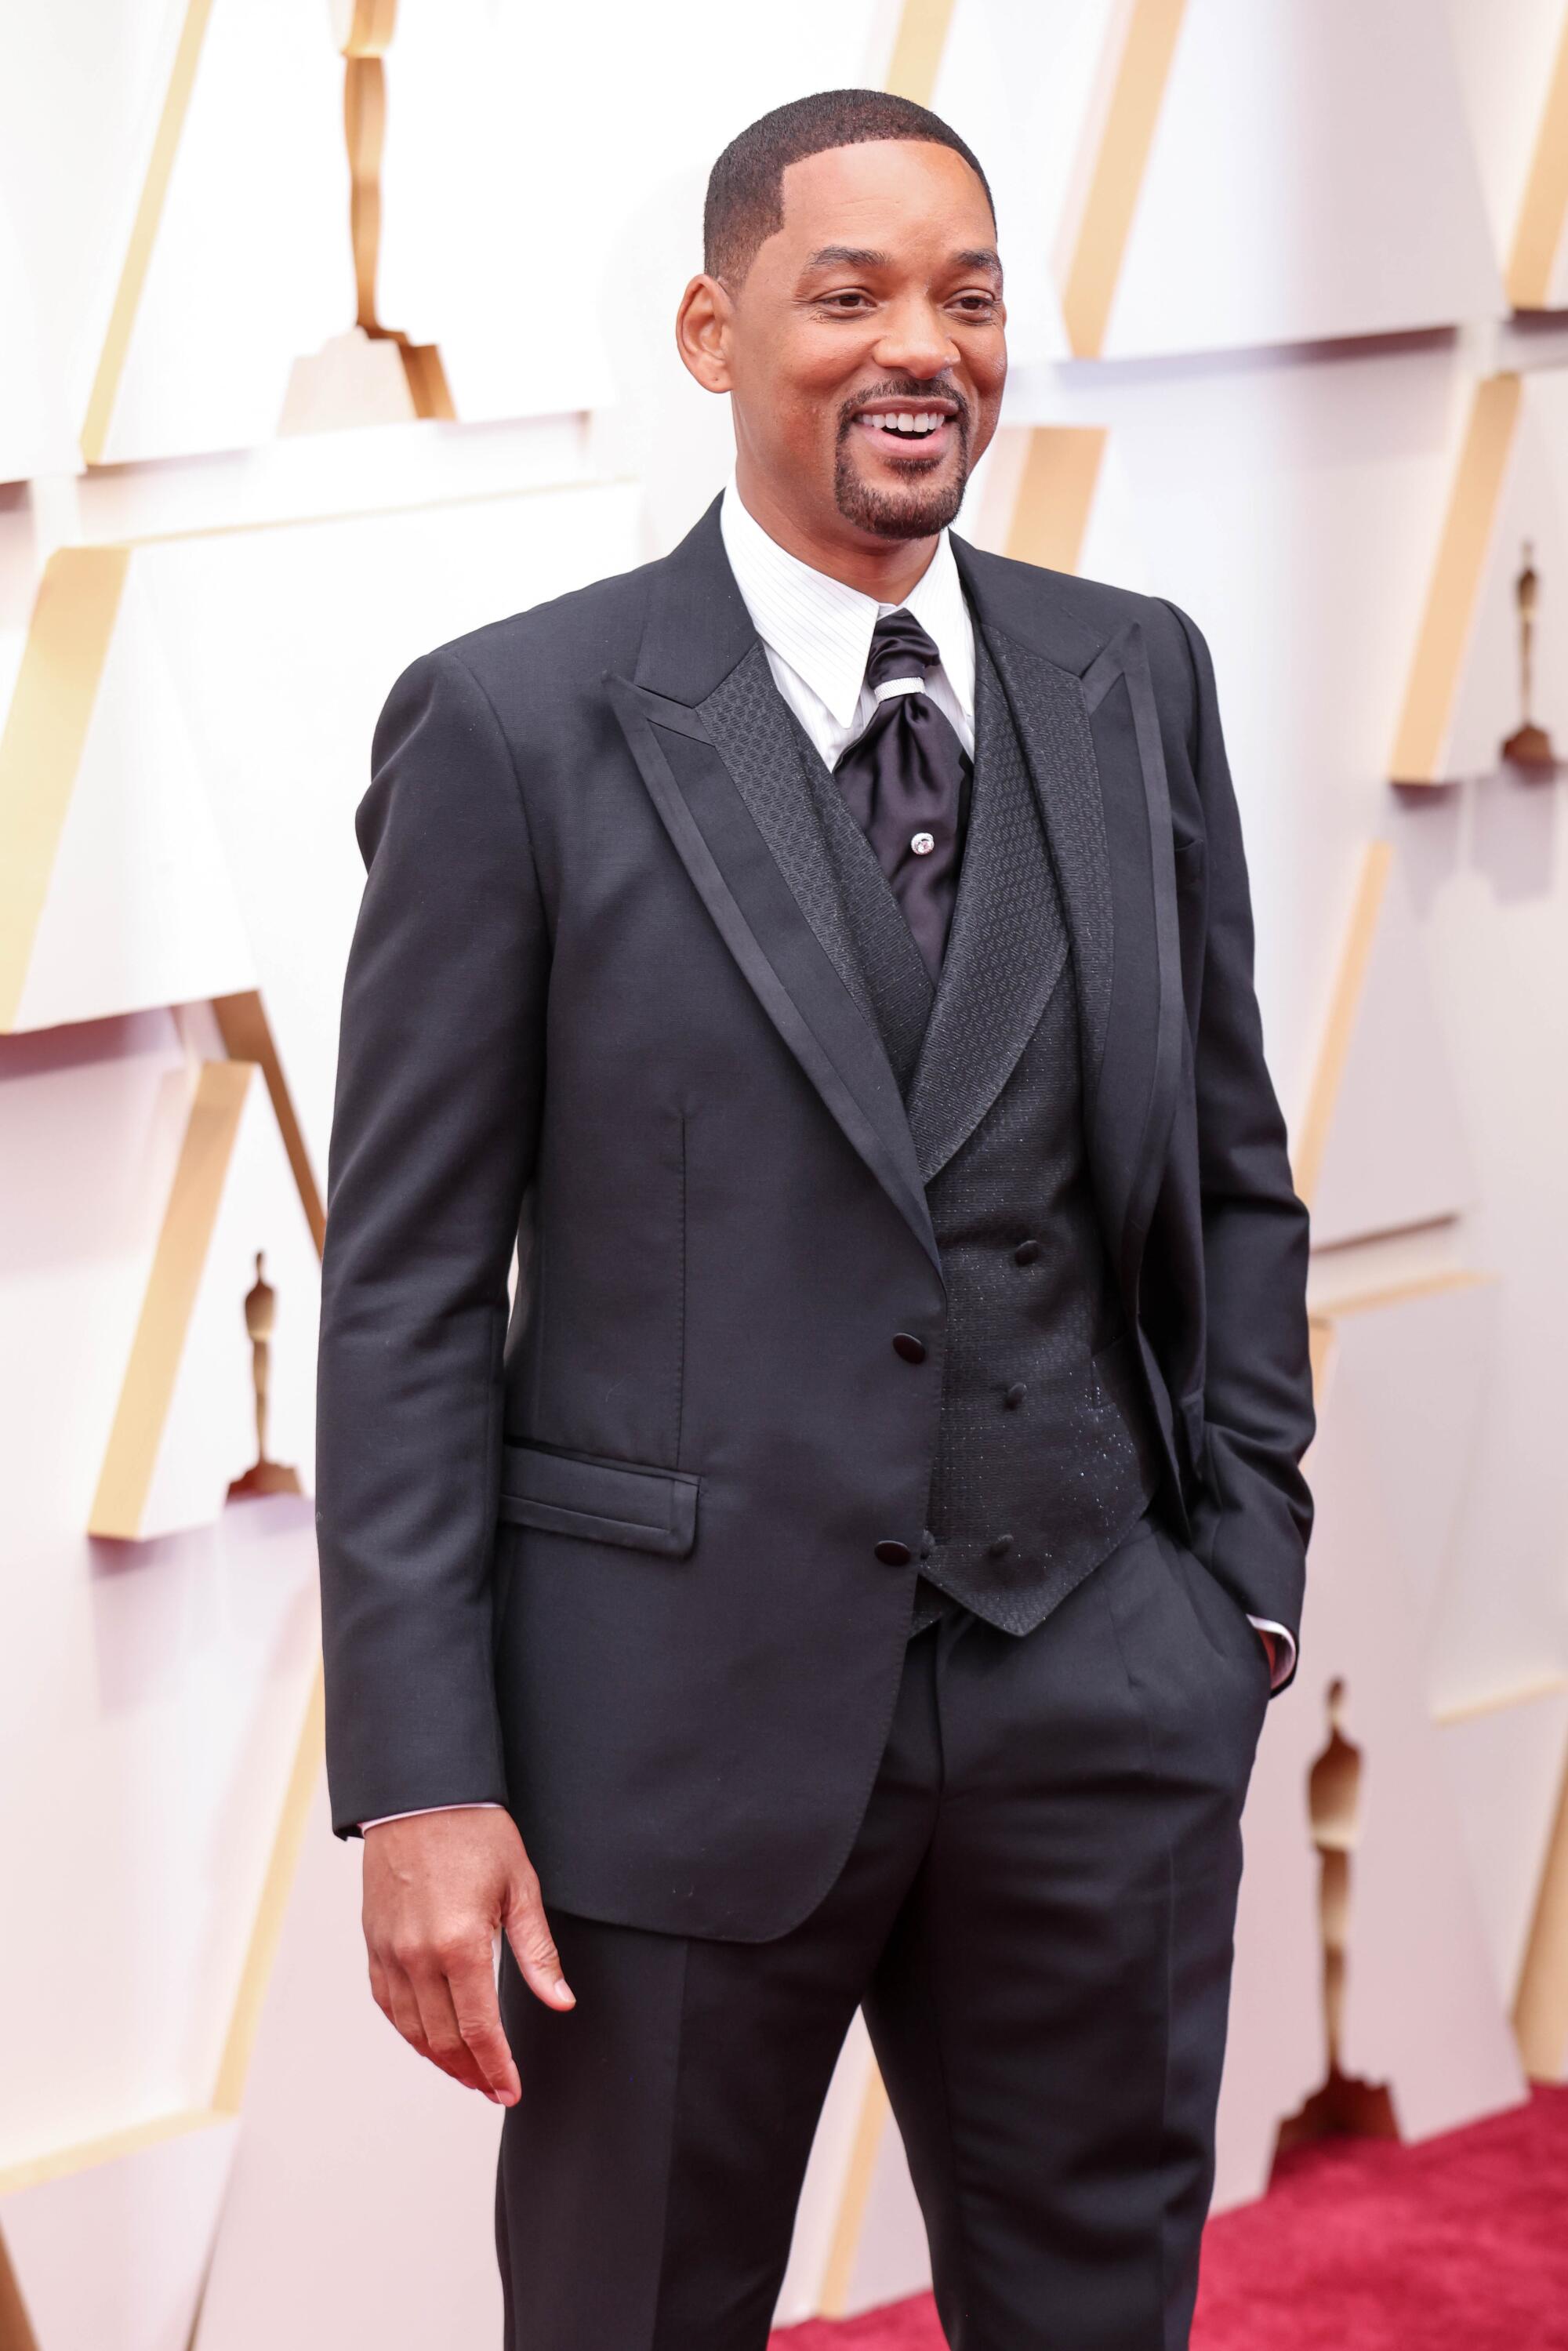 A  man in a suit on the red carpet at the Academy Awards.